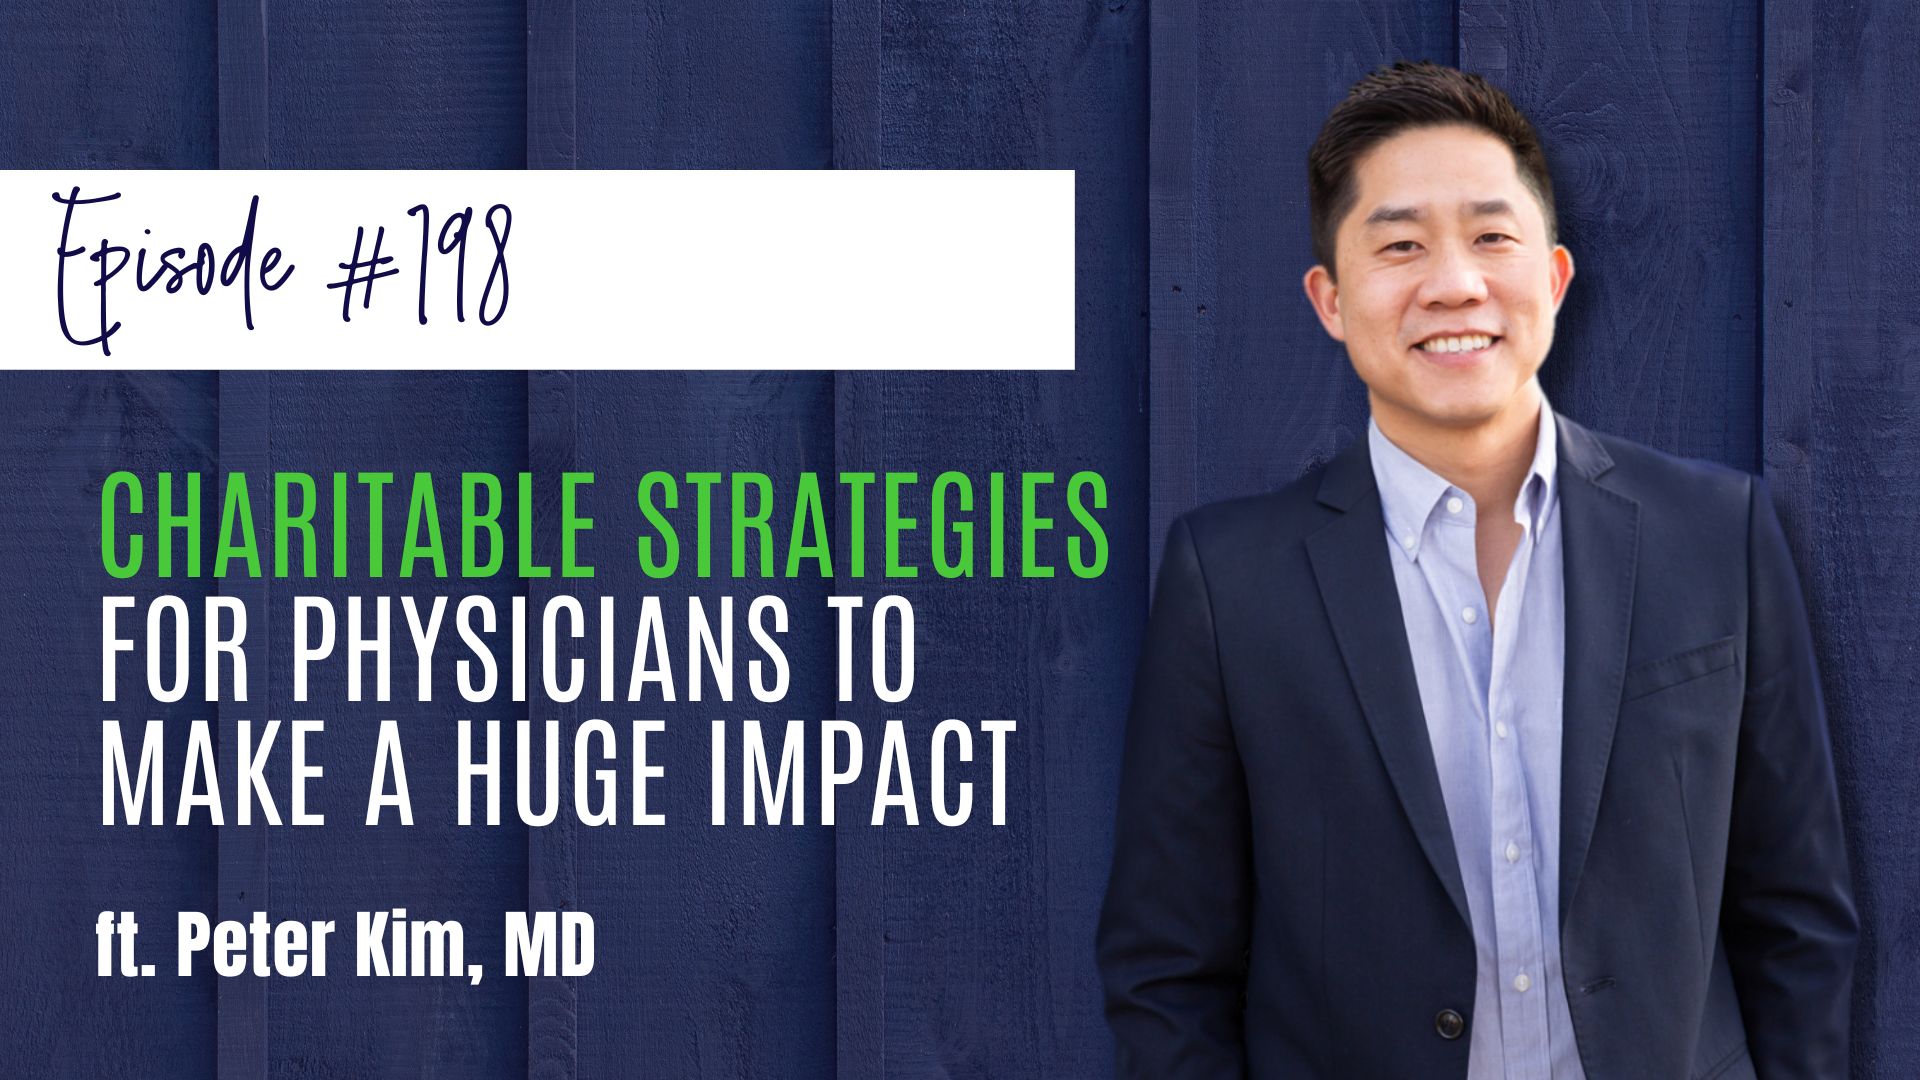 #198 Charitable Strategies for Physicians To Make a Huge Impact, ft. Dr. Peter Kim